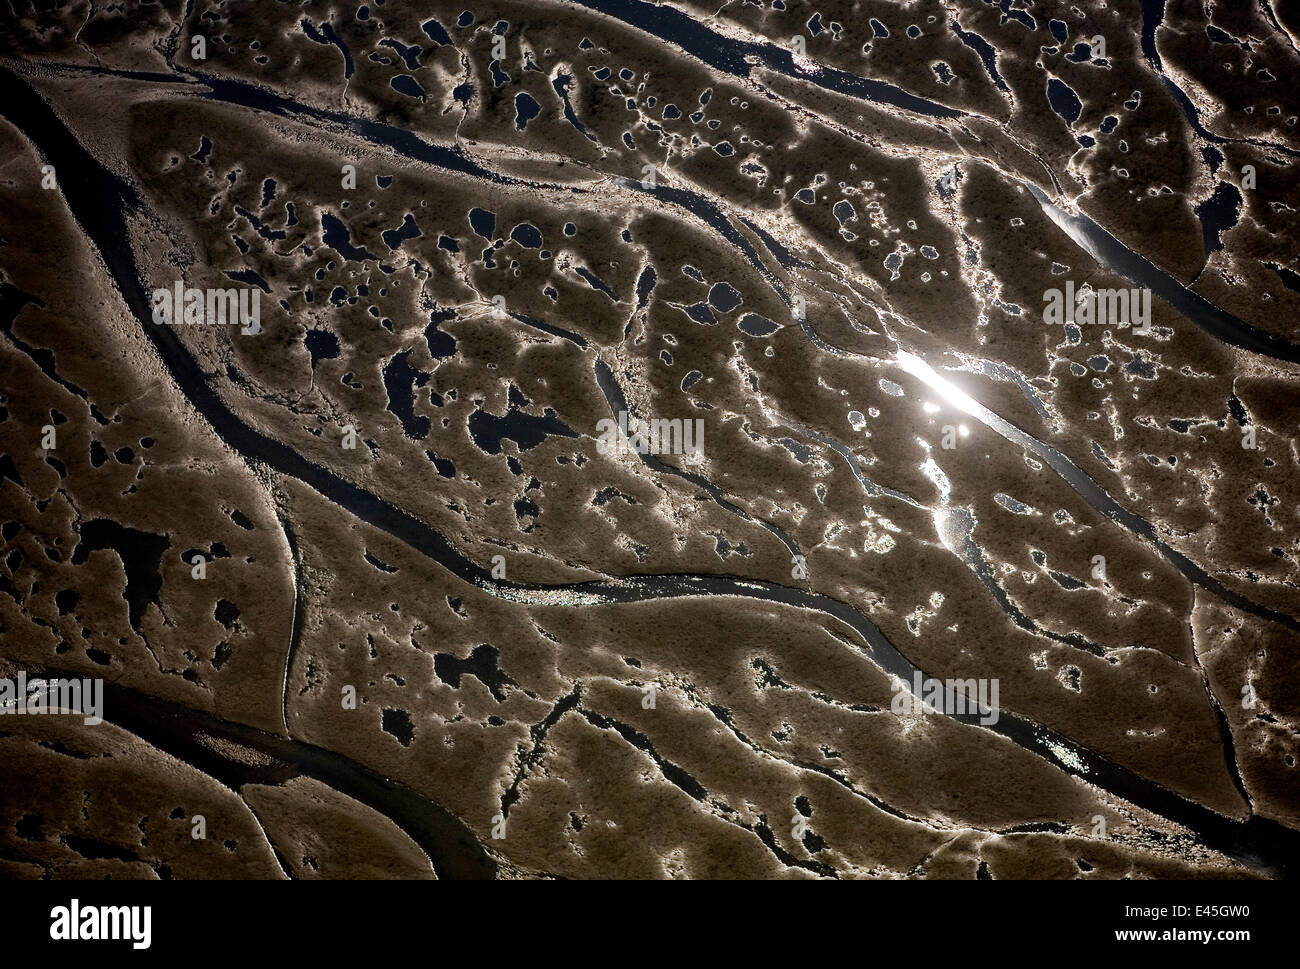 Aerial view of channels and pools left in sand at low tide, Hallig, Germany, April 2009 Stock Photo